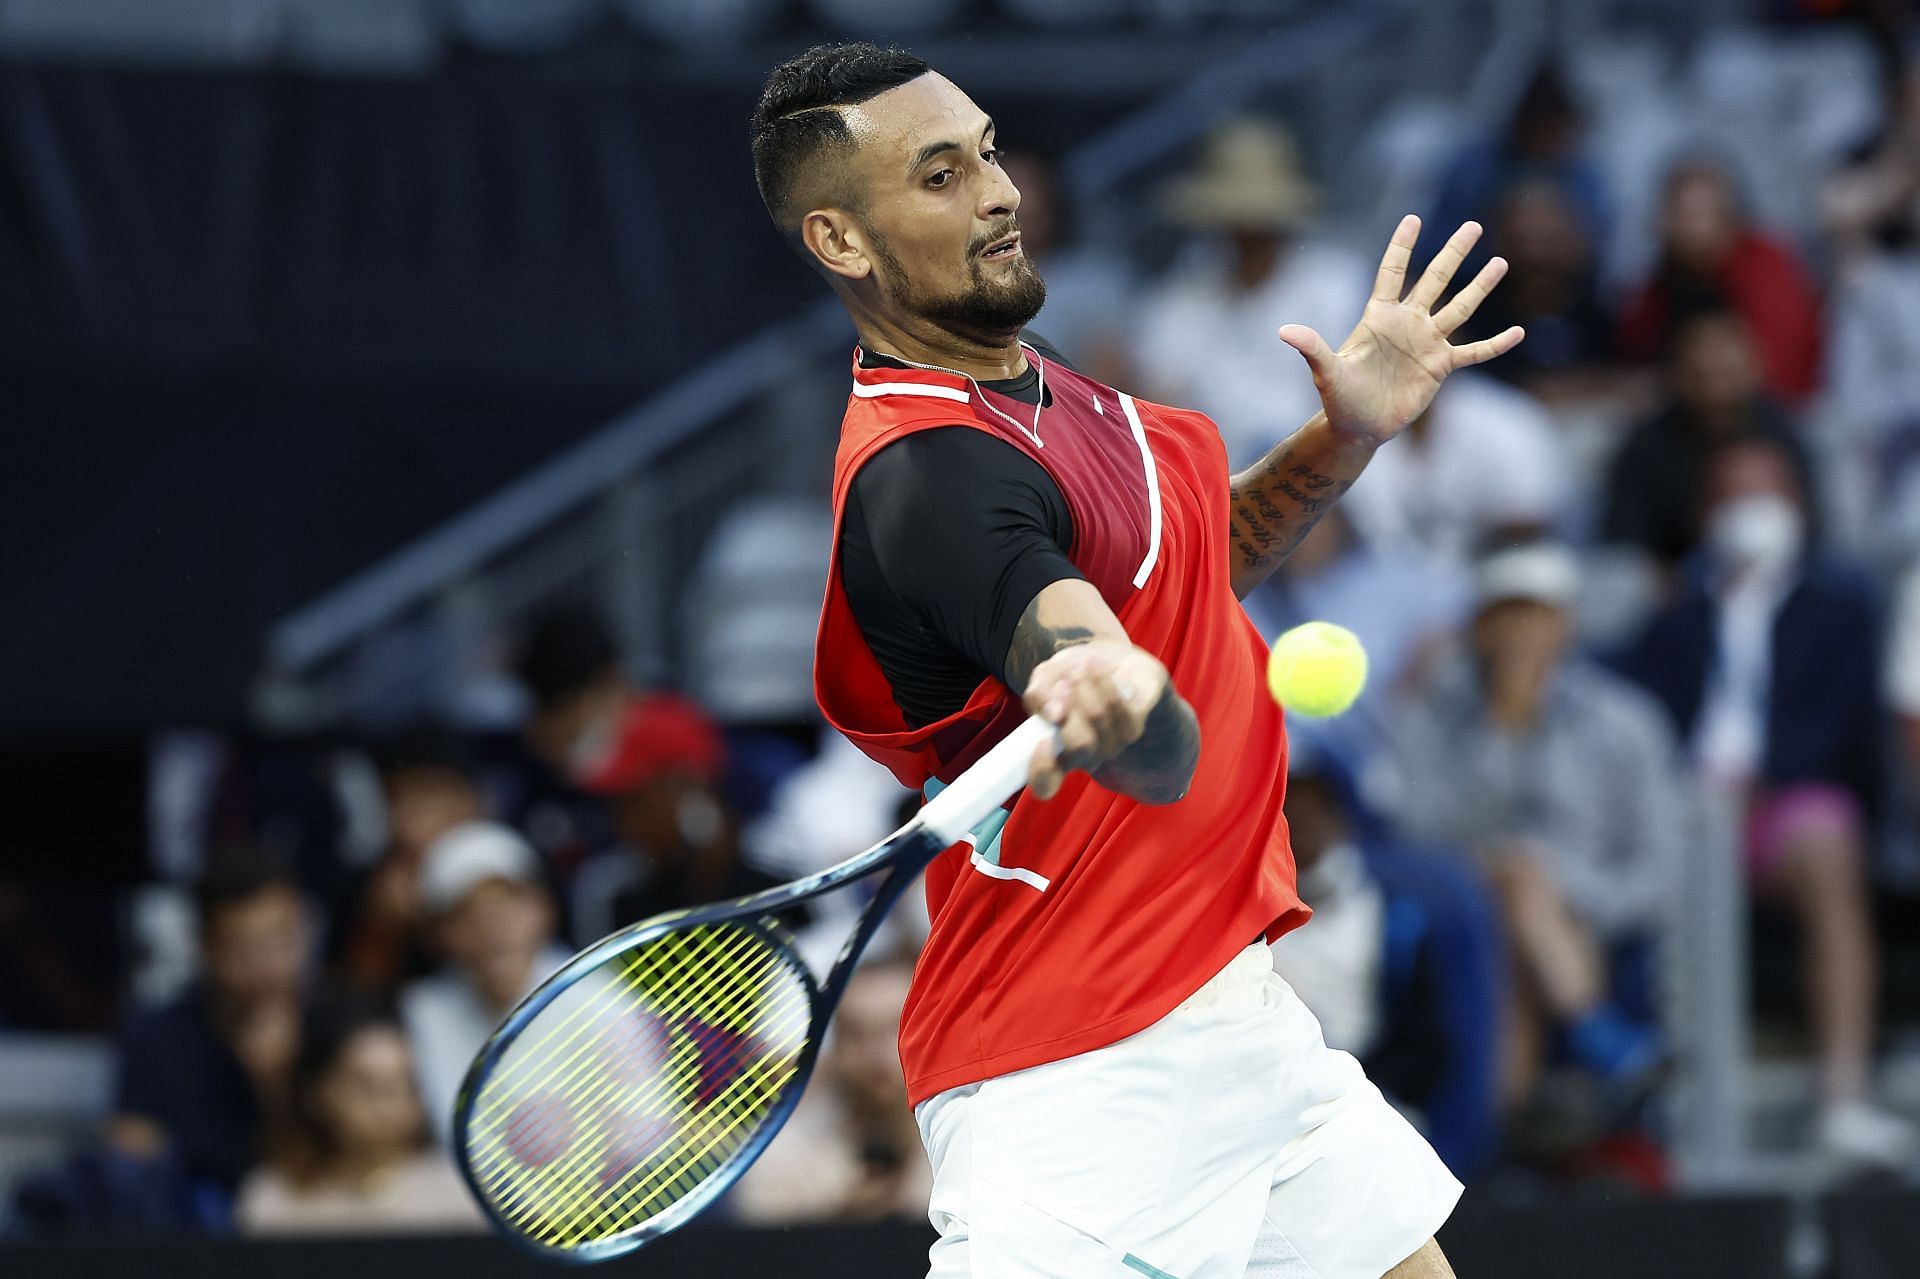 Nick Kyrgios takes on Daniil Medvedev in the second round of the Australian Open